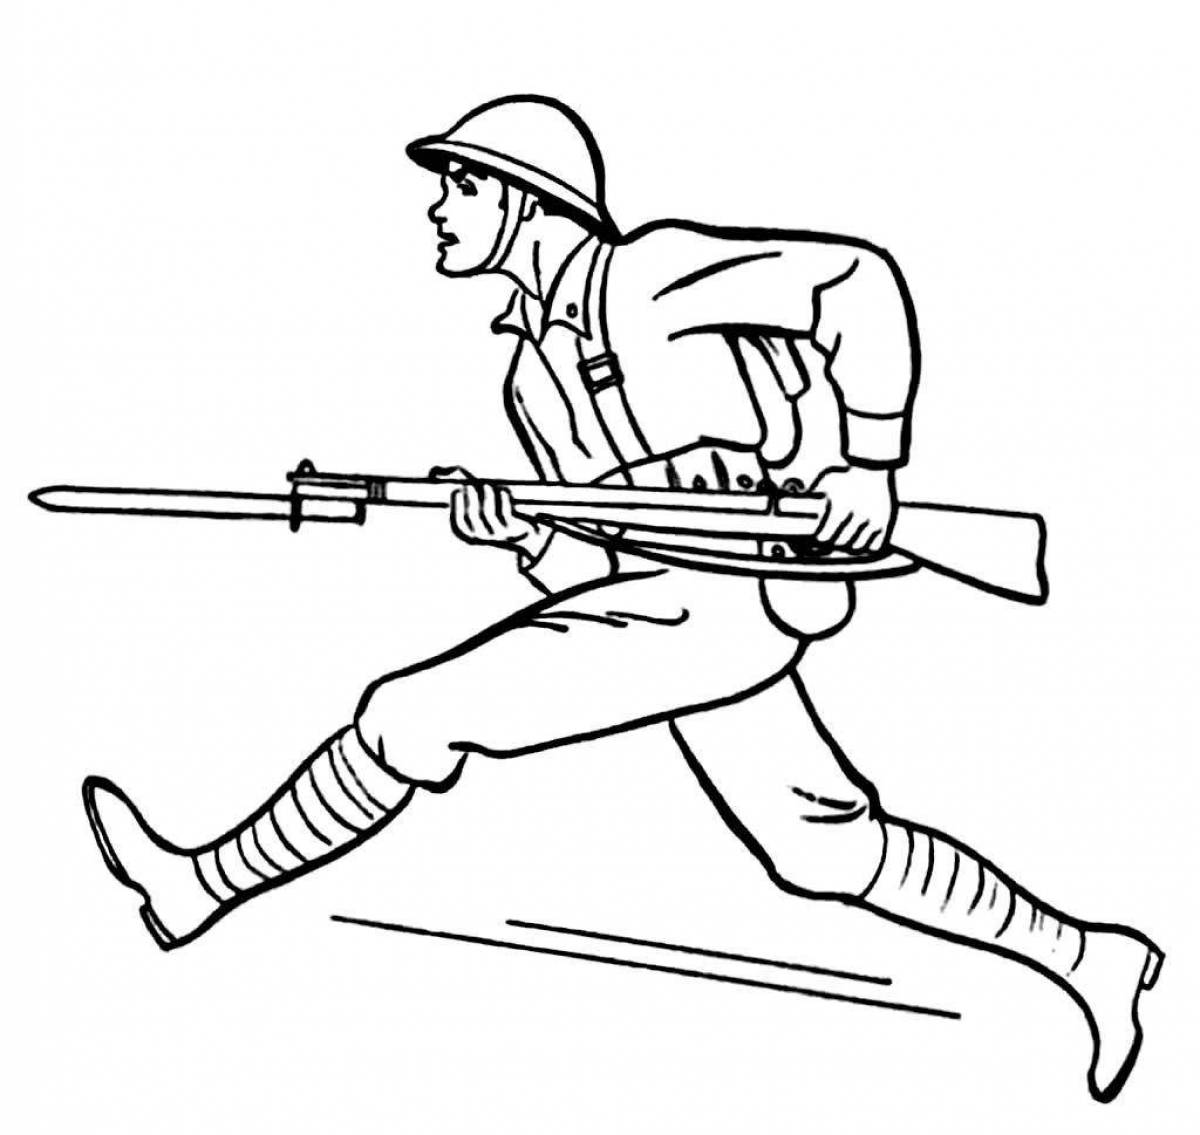 Inspirational military soldier coloring pages